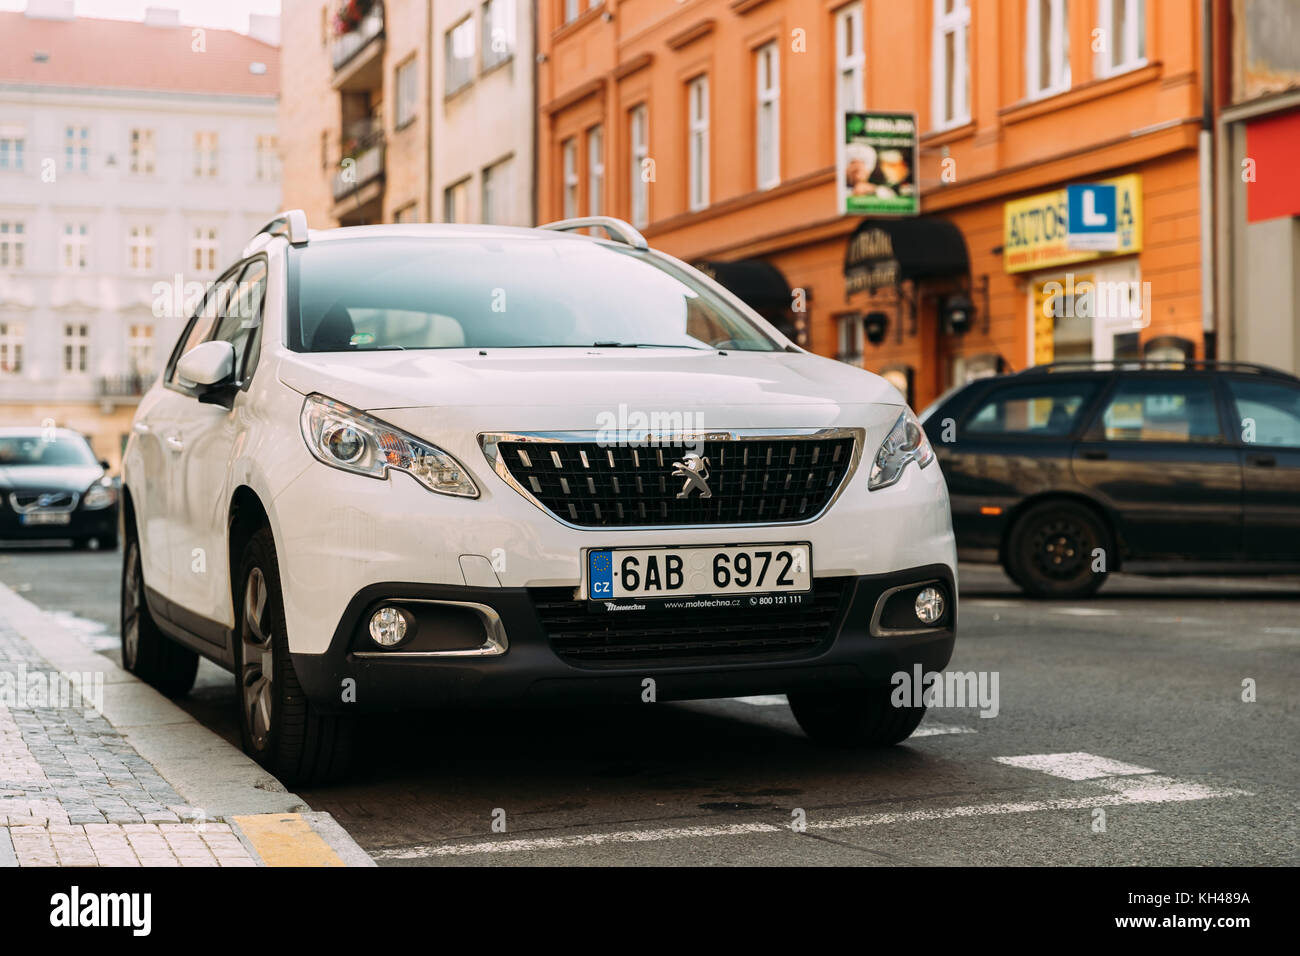 Prague, Czech Republic - September 23, 2017: Front View Of White Peugeot 2008 Car Parked In Street. Mini Sport Utility Vehicle Produced By French Manu Stock Photo